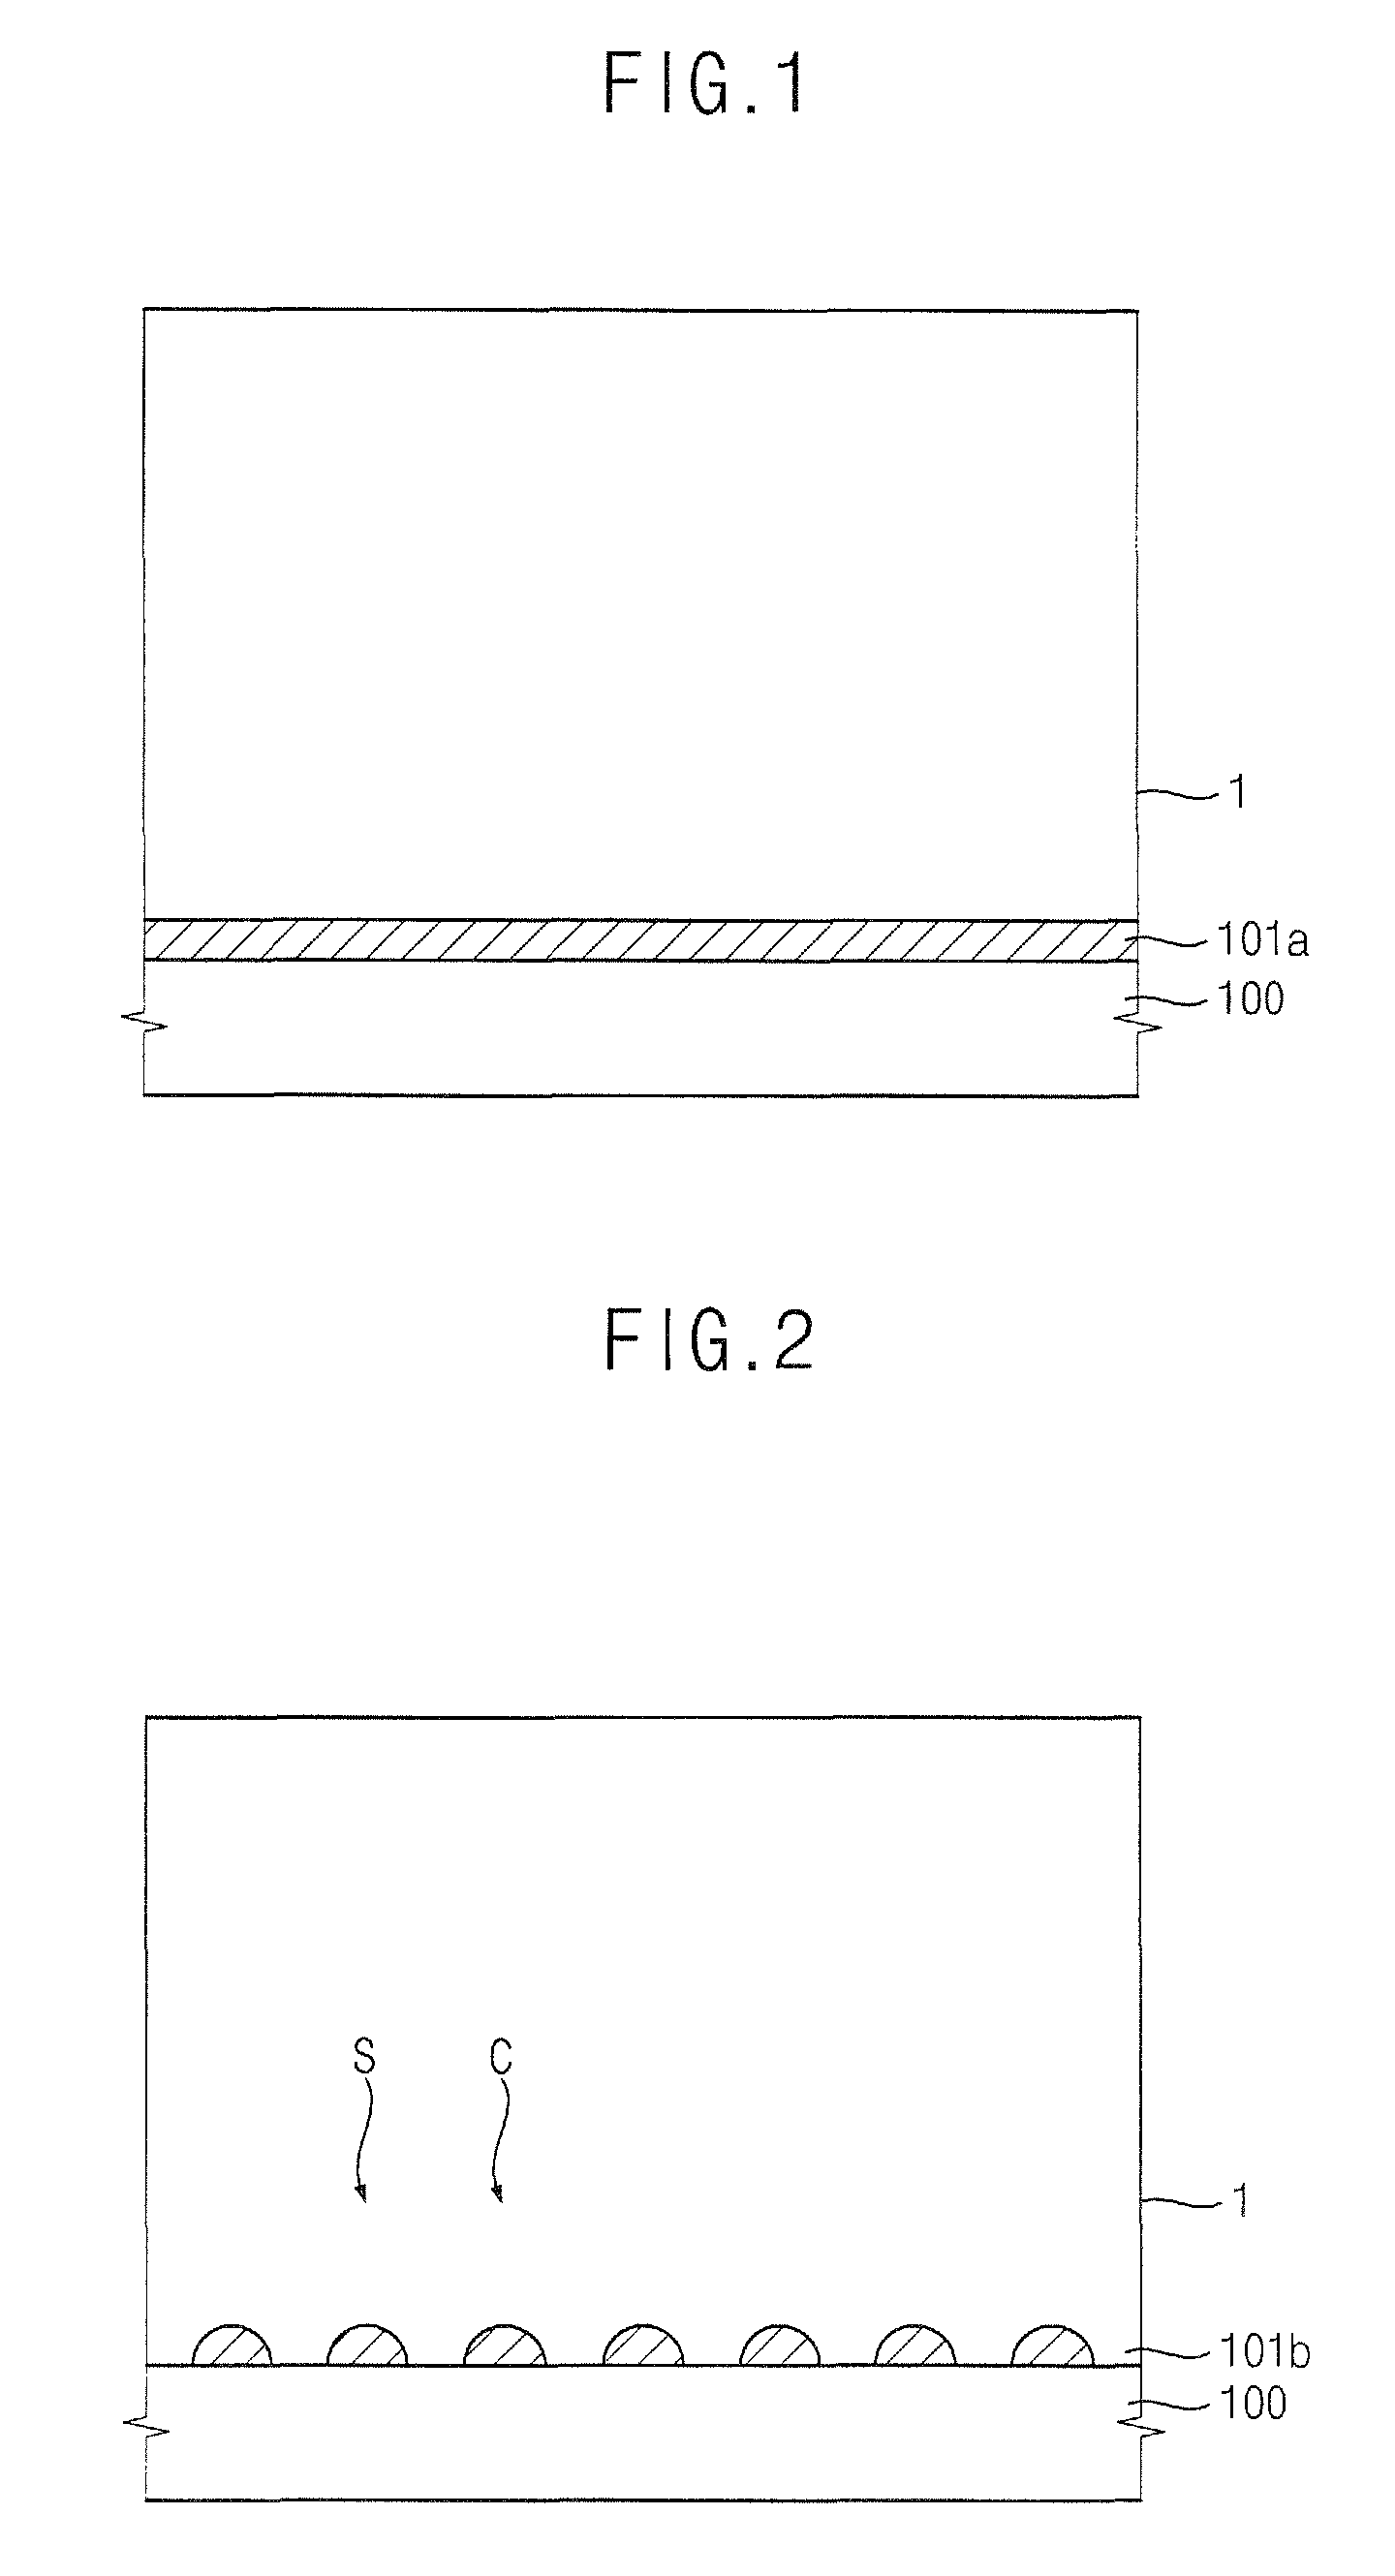 Method of forming a carbon nano-tube